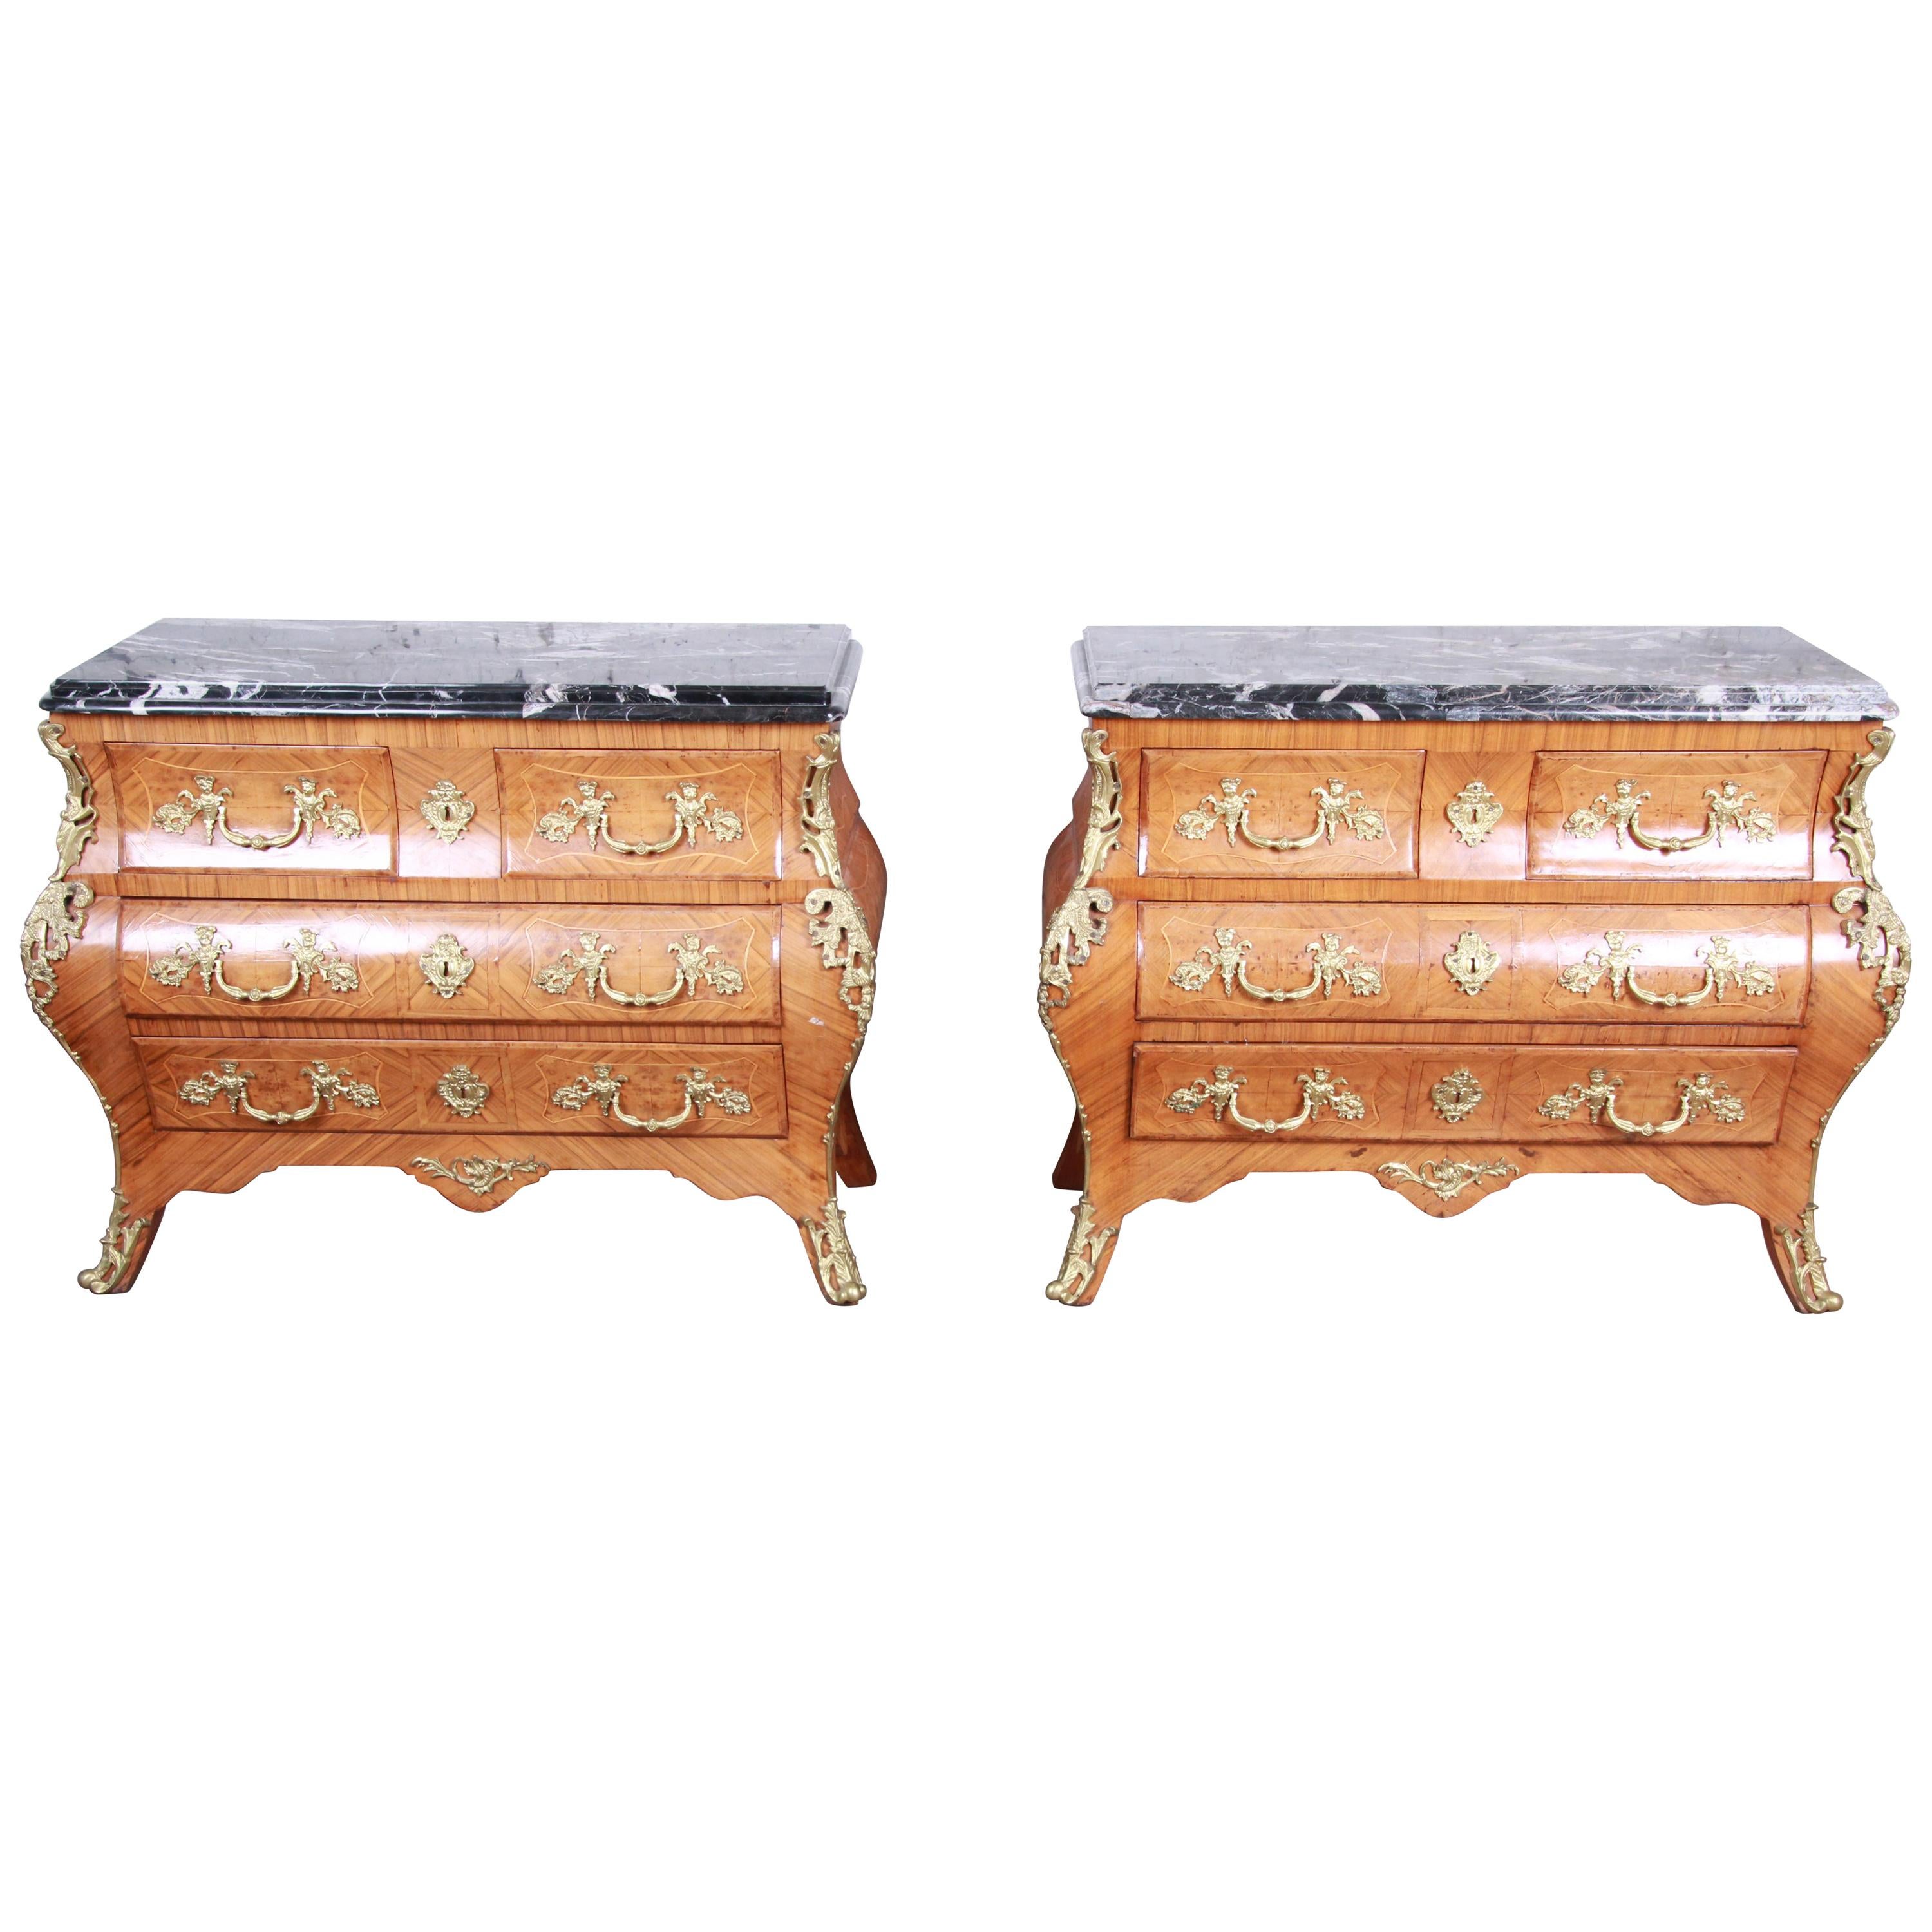 Ornate French Louis XV Style Inlaid Mahogany Marble Top Bombay Chests, Pair